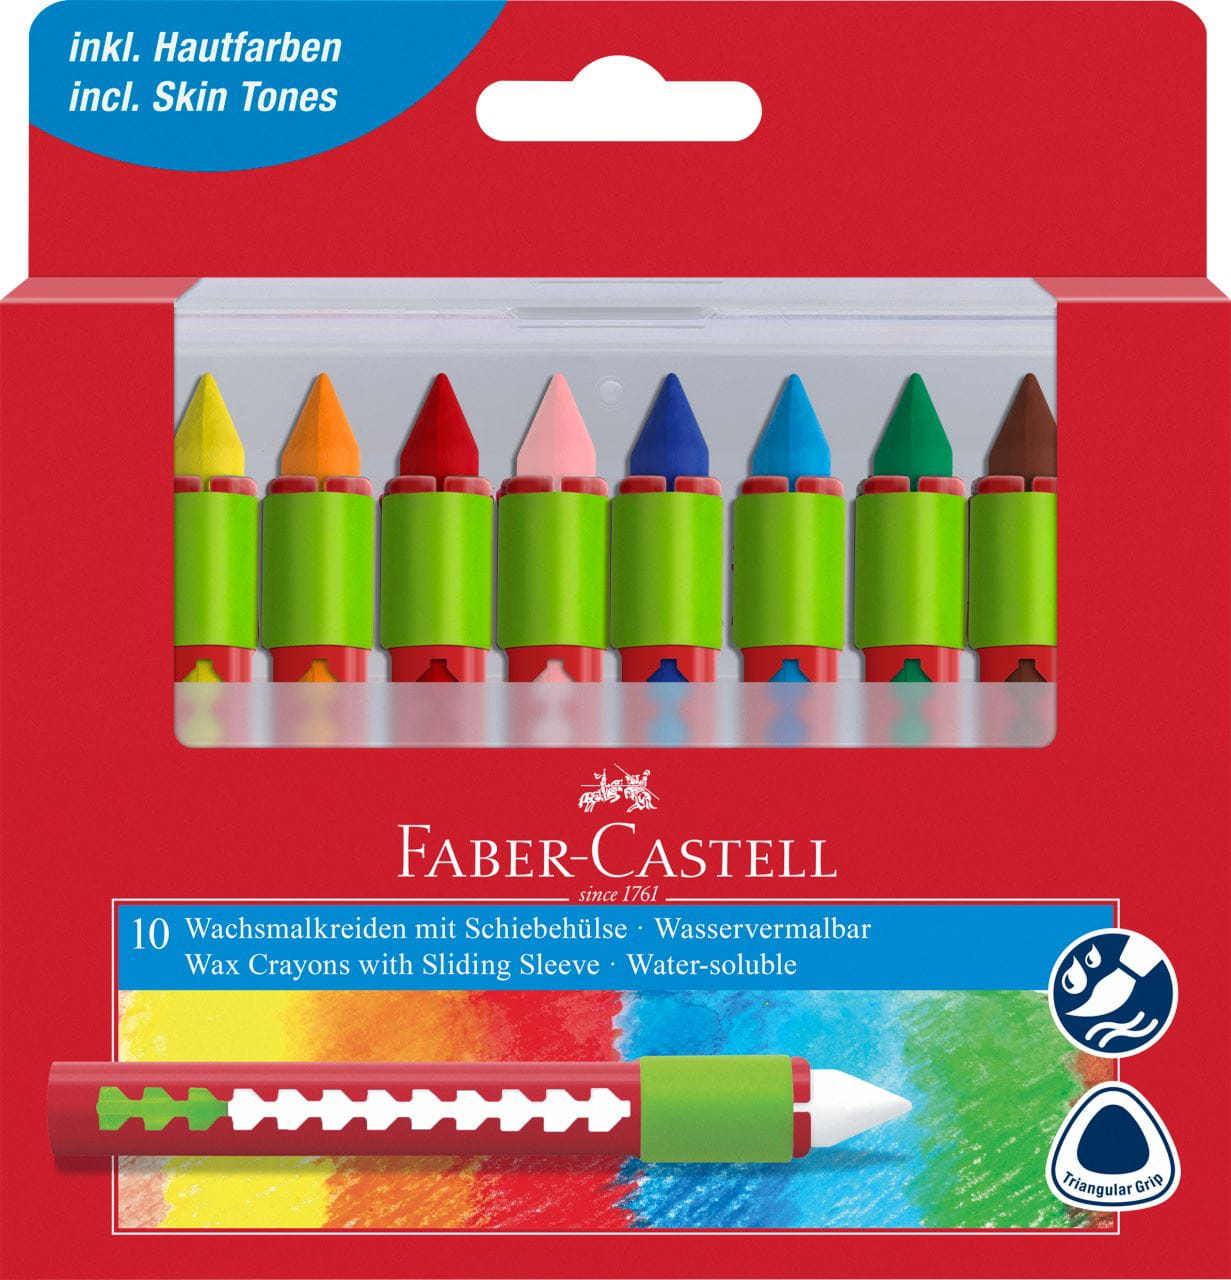 Faber-Castell - Wax crayon round with sliding cover, plastic box of 10